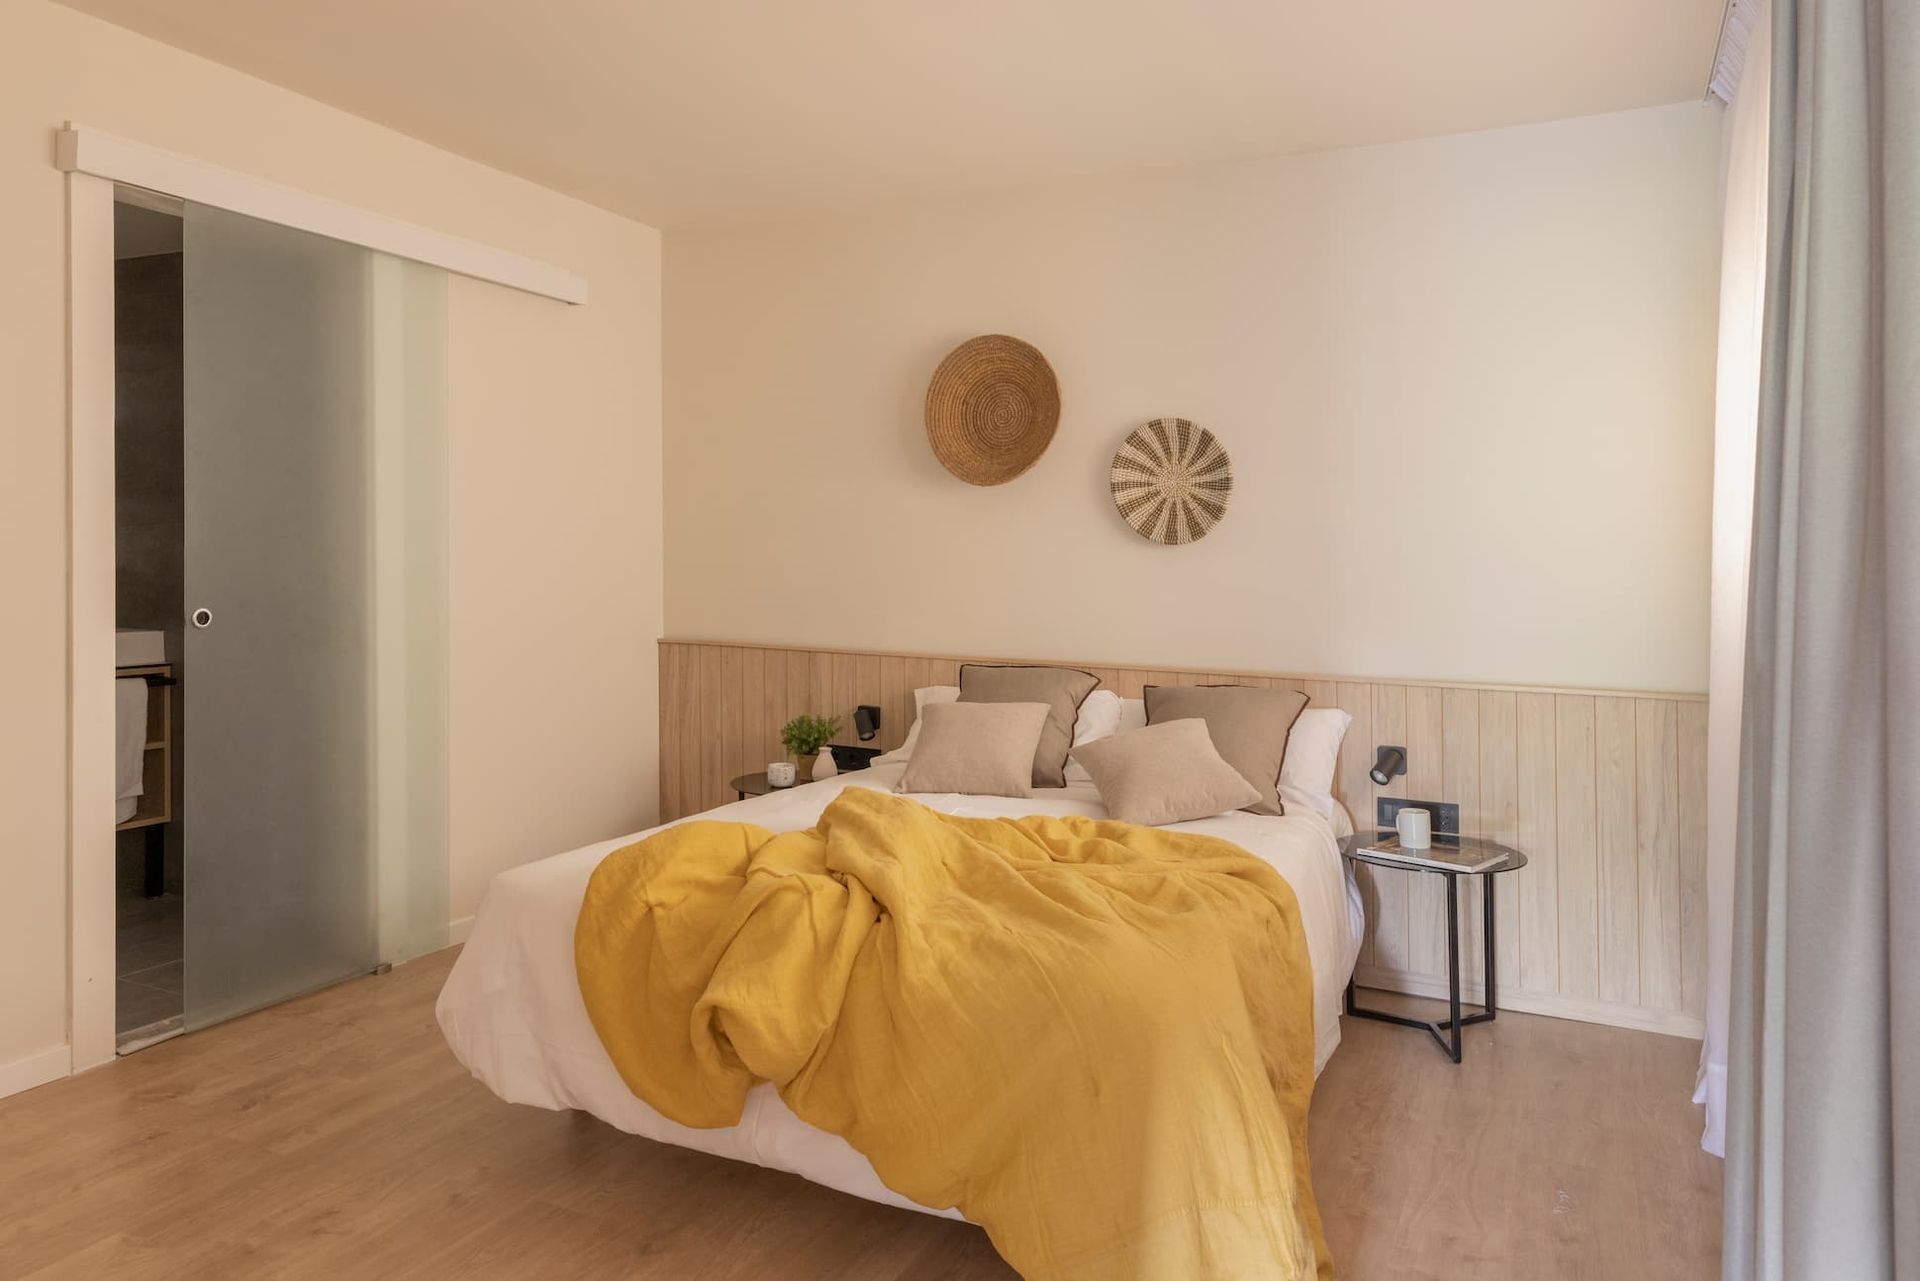 2 bedroom apartment with a balcony in Barcelona Sant Antoni